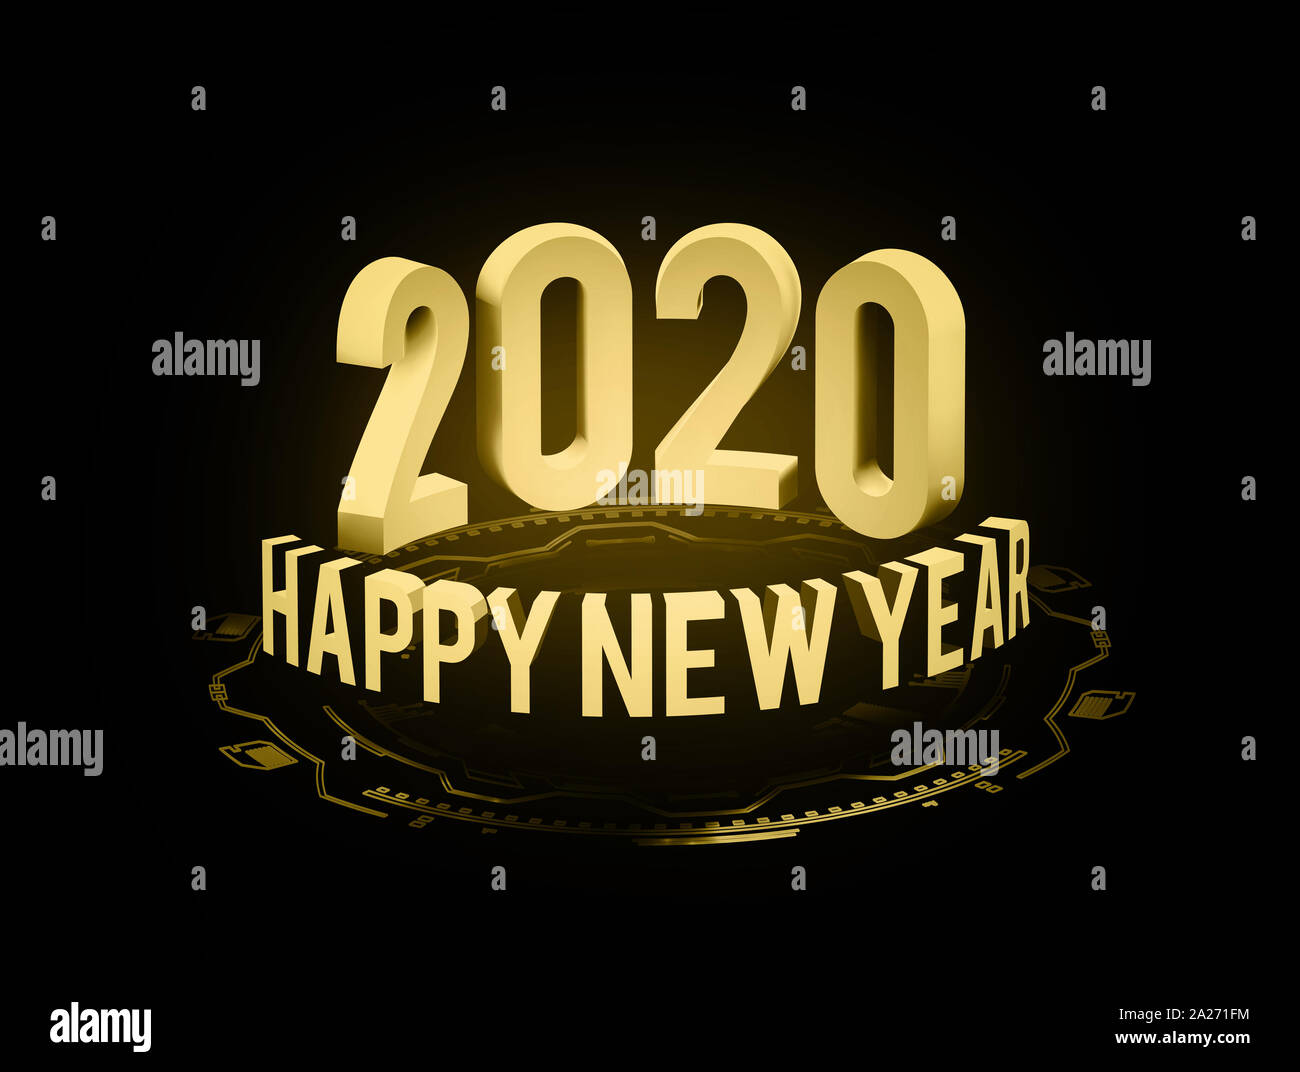 Congratulations on the New Year 2020 in technostyle. Rounded 3D text with HUD elements. Big data. 3d illustration Stock Photo